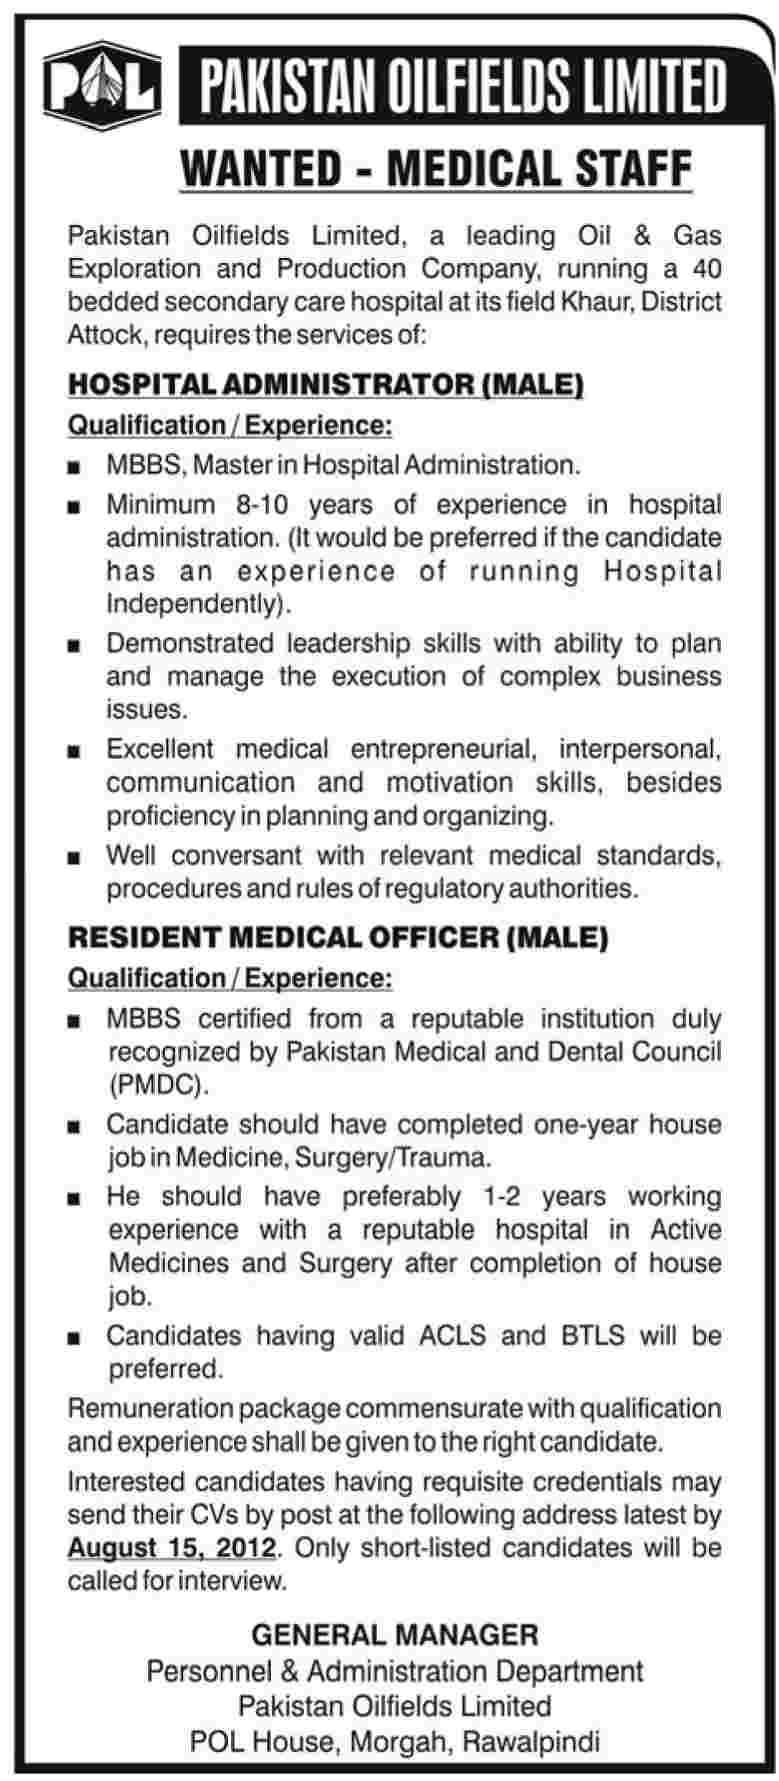 Pakistan Oilfields Limited (POL) Requires Medical Staff